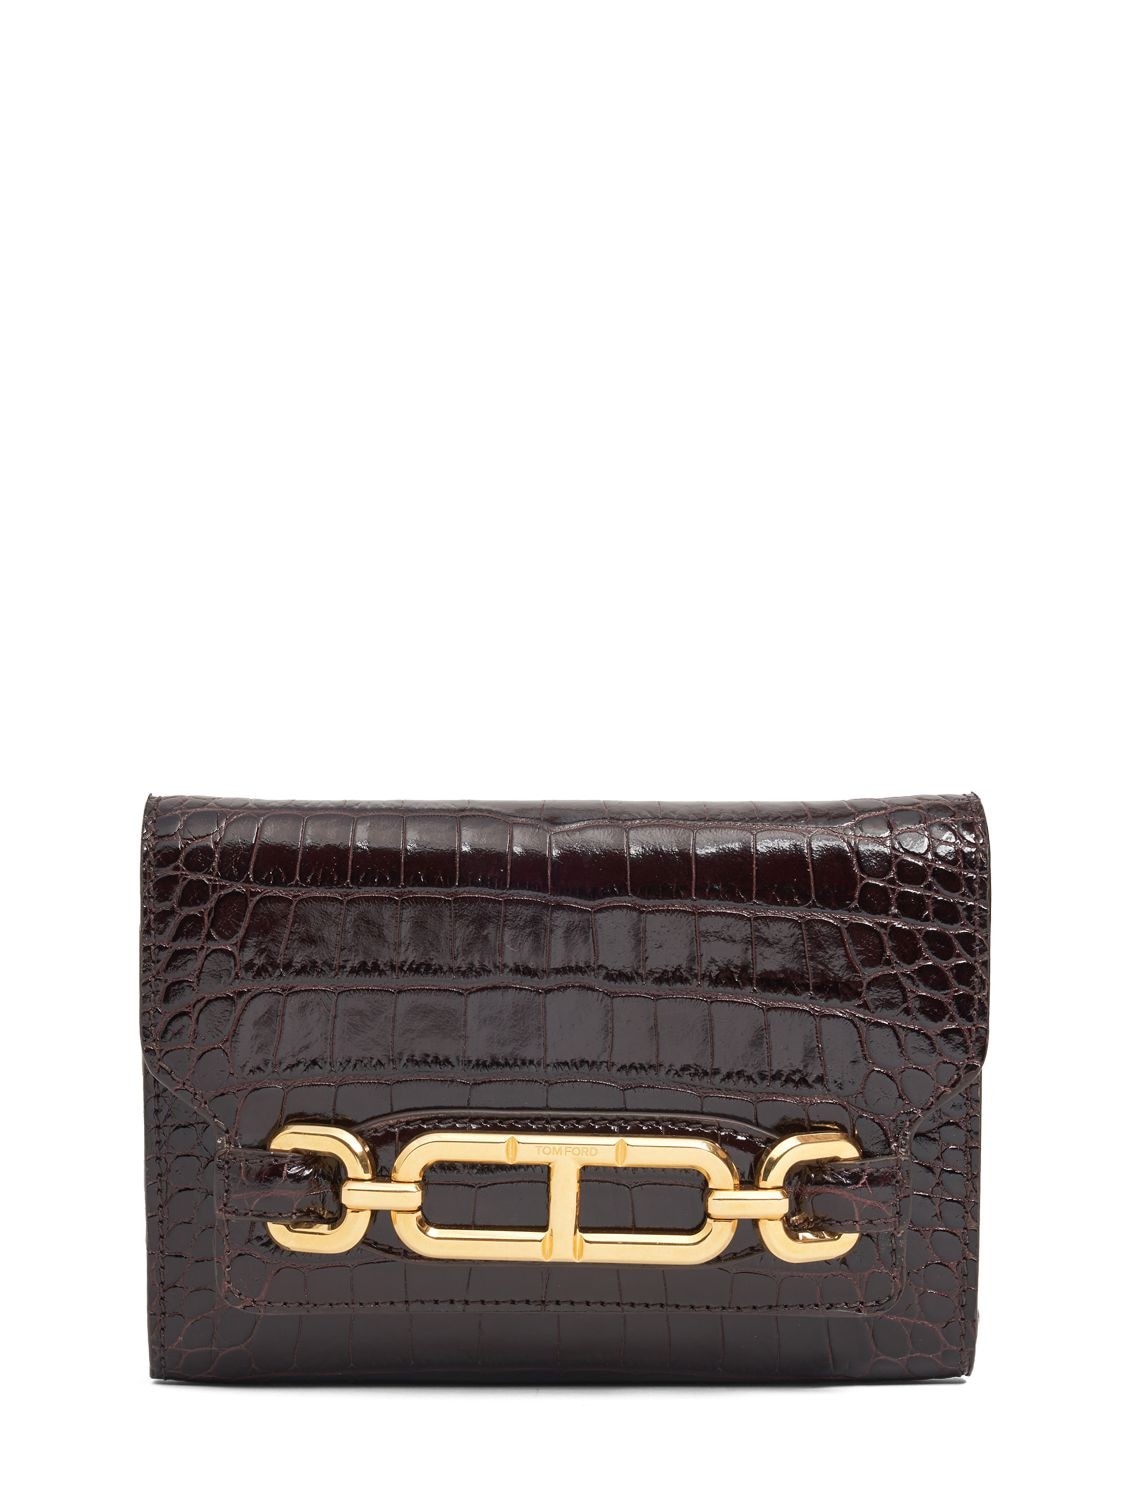 Tom Ford Mini Shiny Croc Embossed Leather Bag In Espresso